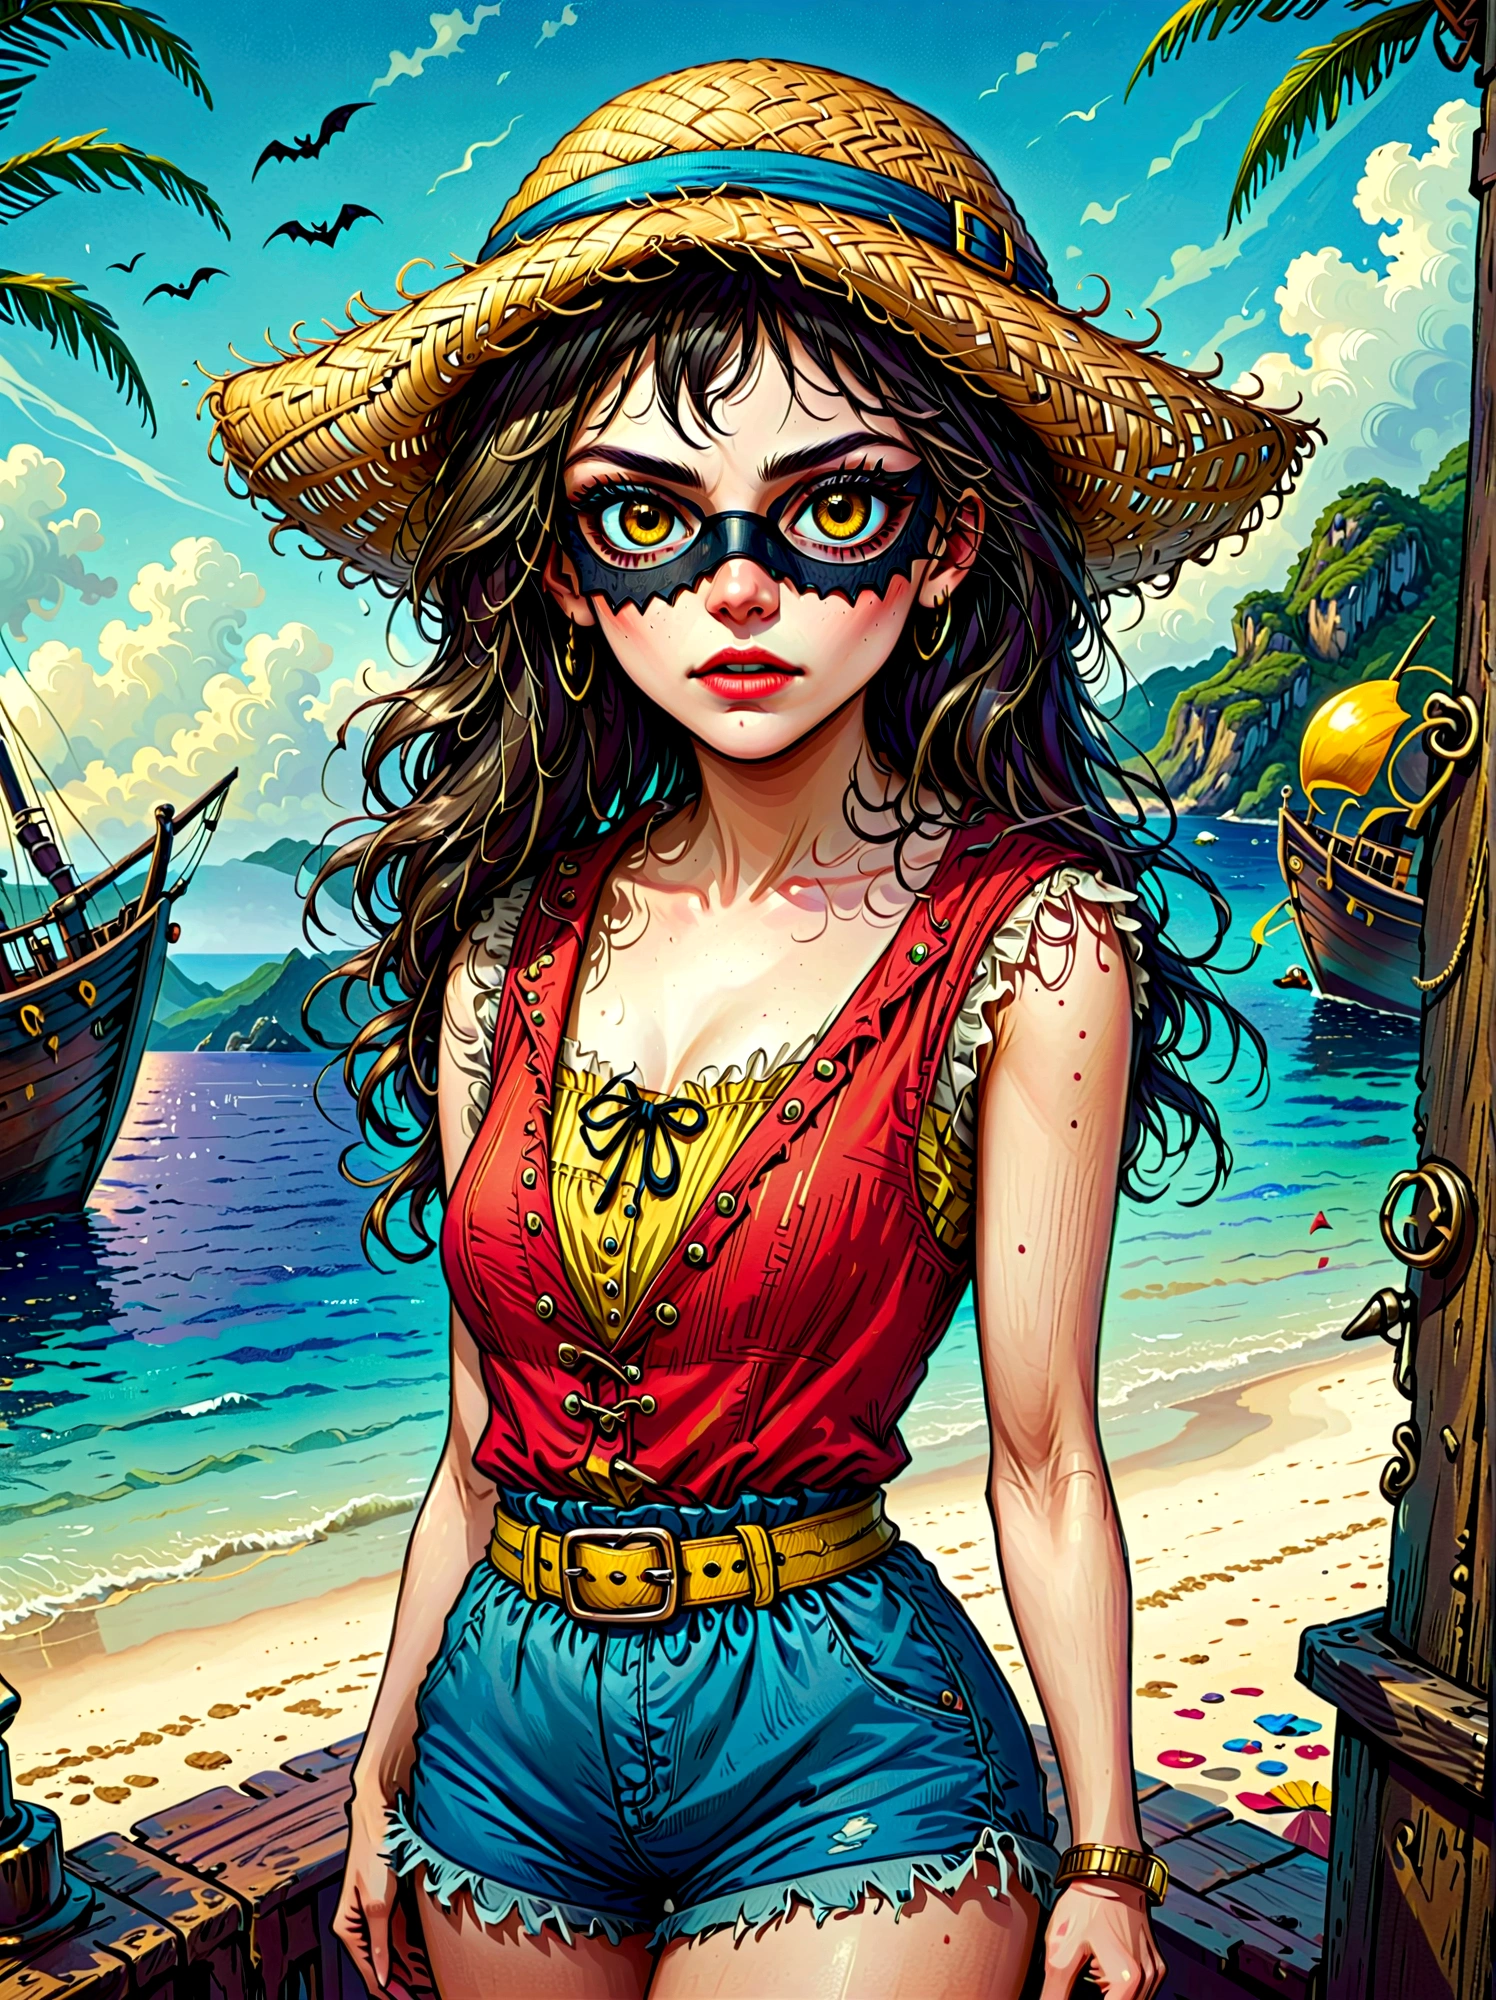 (whole body:1.3), 1 female captain, Wearing a straw hat, (Wearing a black eye mask), Rich expression, (gloomy), (Gothic horror), illustration, Red vest, Blue shorts, Yellow belt, Black sandals, (Strange), exaggerated, Caribbean Sea in the background，Boat deck，Dark theme elements, Pencil Sketch
